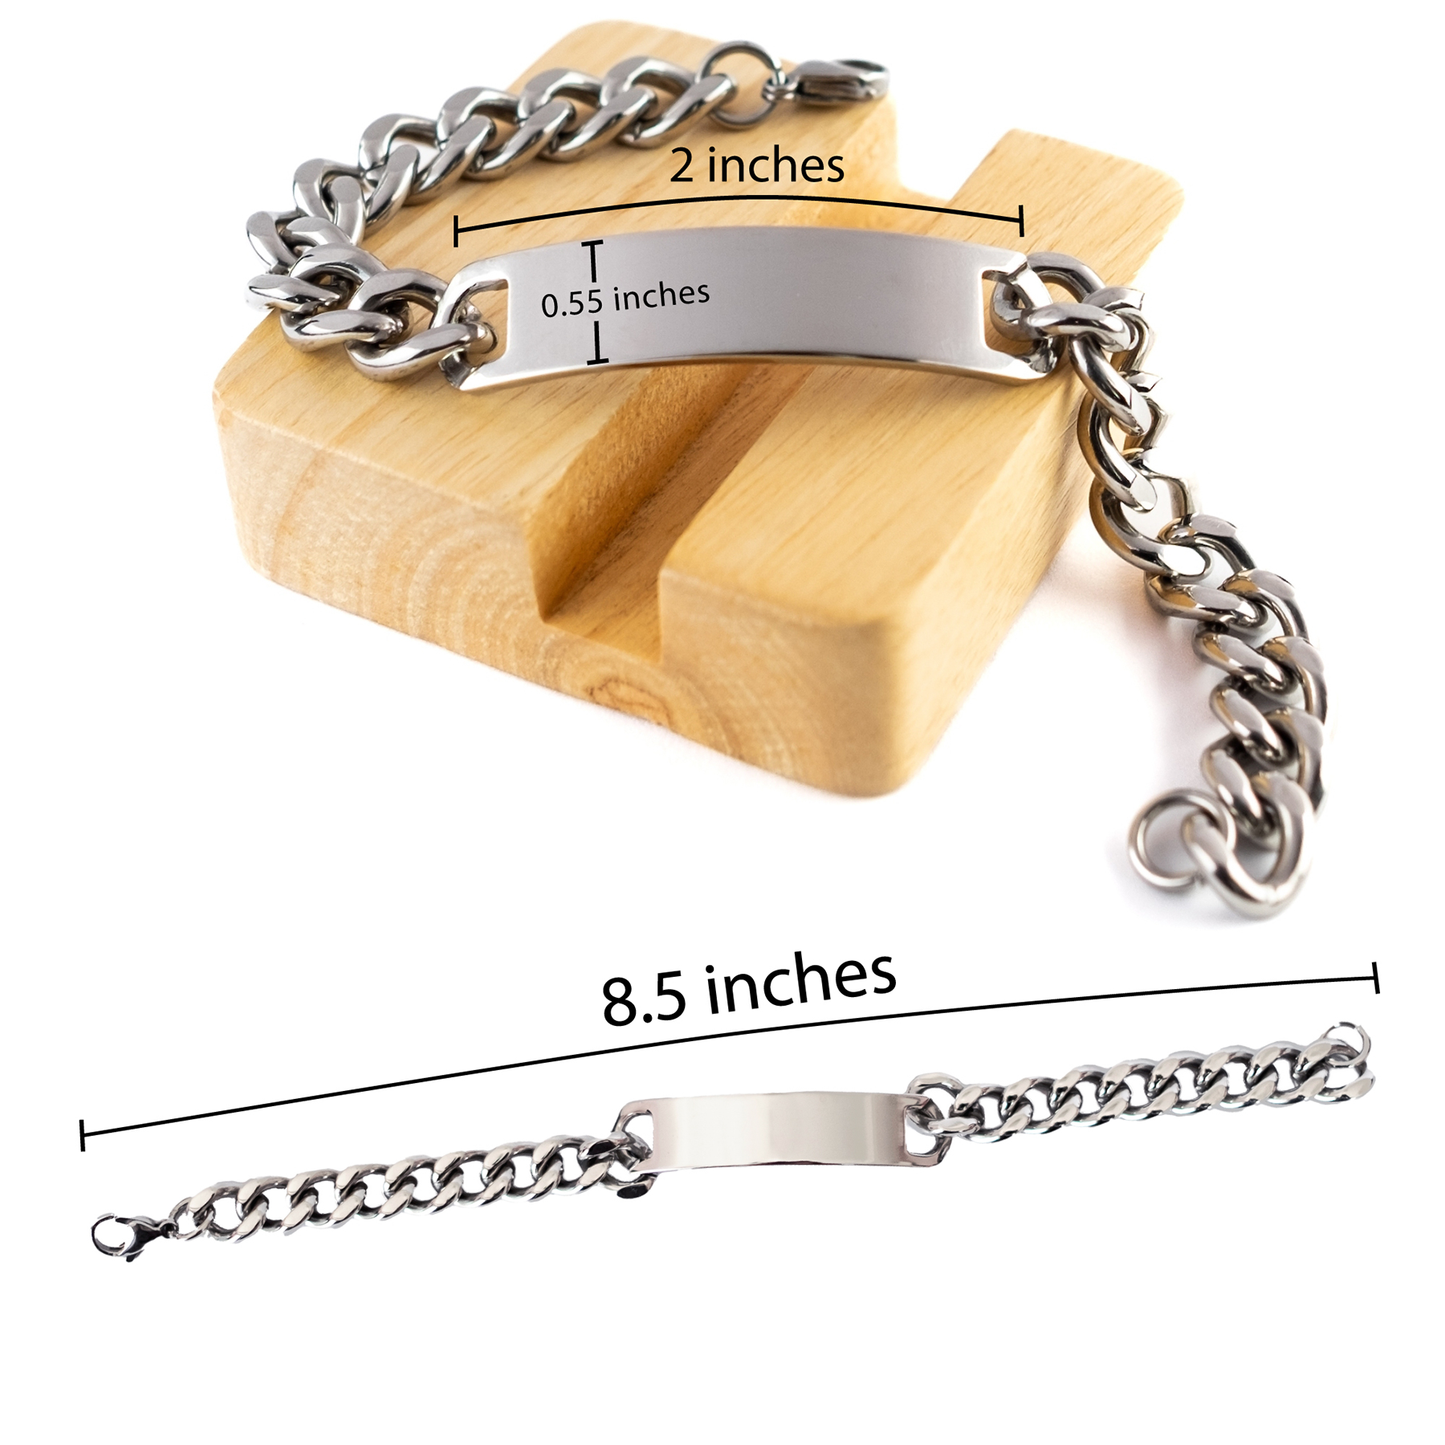 To My Unbiological Mom Thank You Gifts, You are appreciated more than you know, Appreciation Cuban Chain Stainless Steel Bracelet for Unbiological Mom, Birthday Unique Gifts for Unbiological Mom